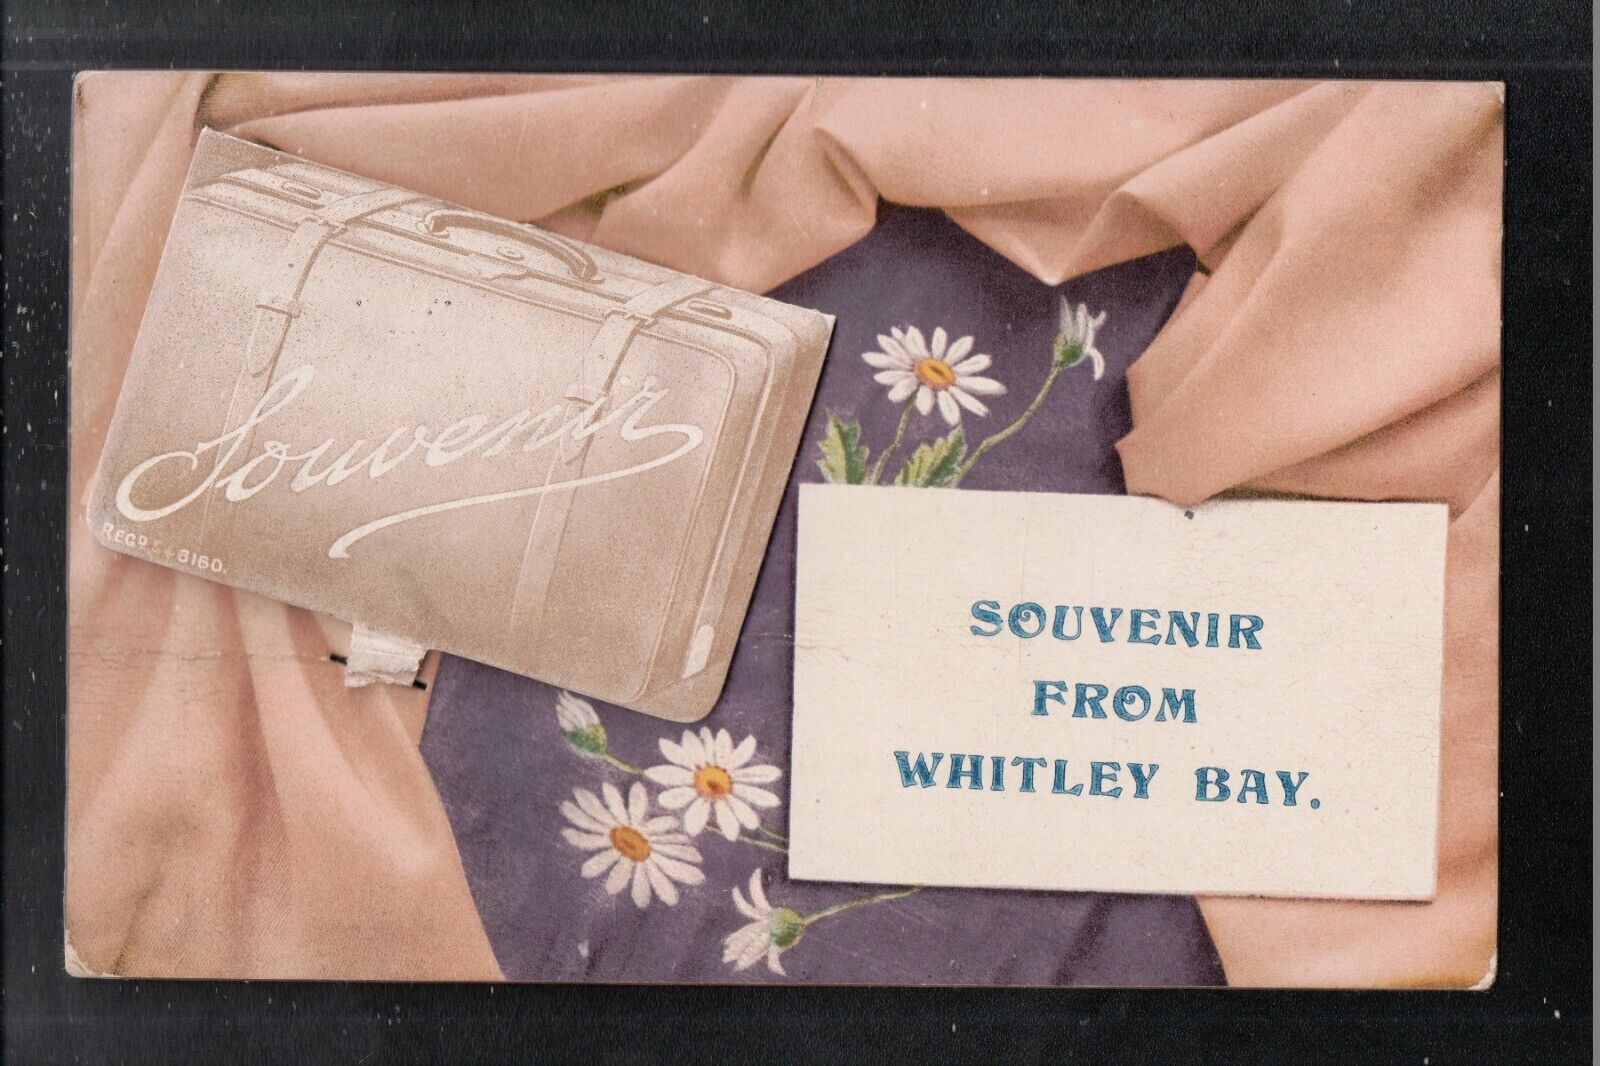 House Clearance - Souvenir From WHITLEY BAY 1911 Novelty Service LIABLE TO LETTER RATE 1d TO PAY